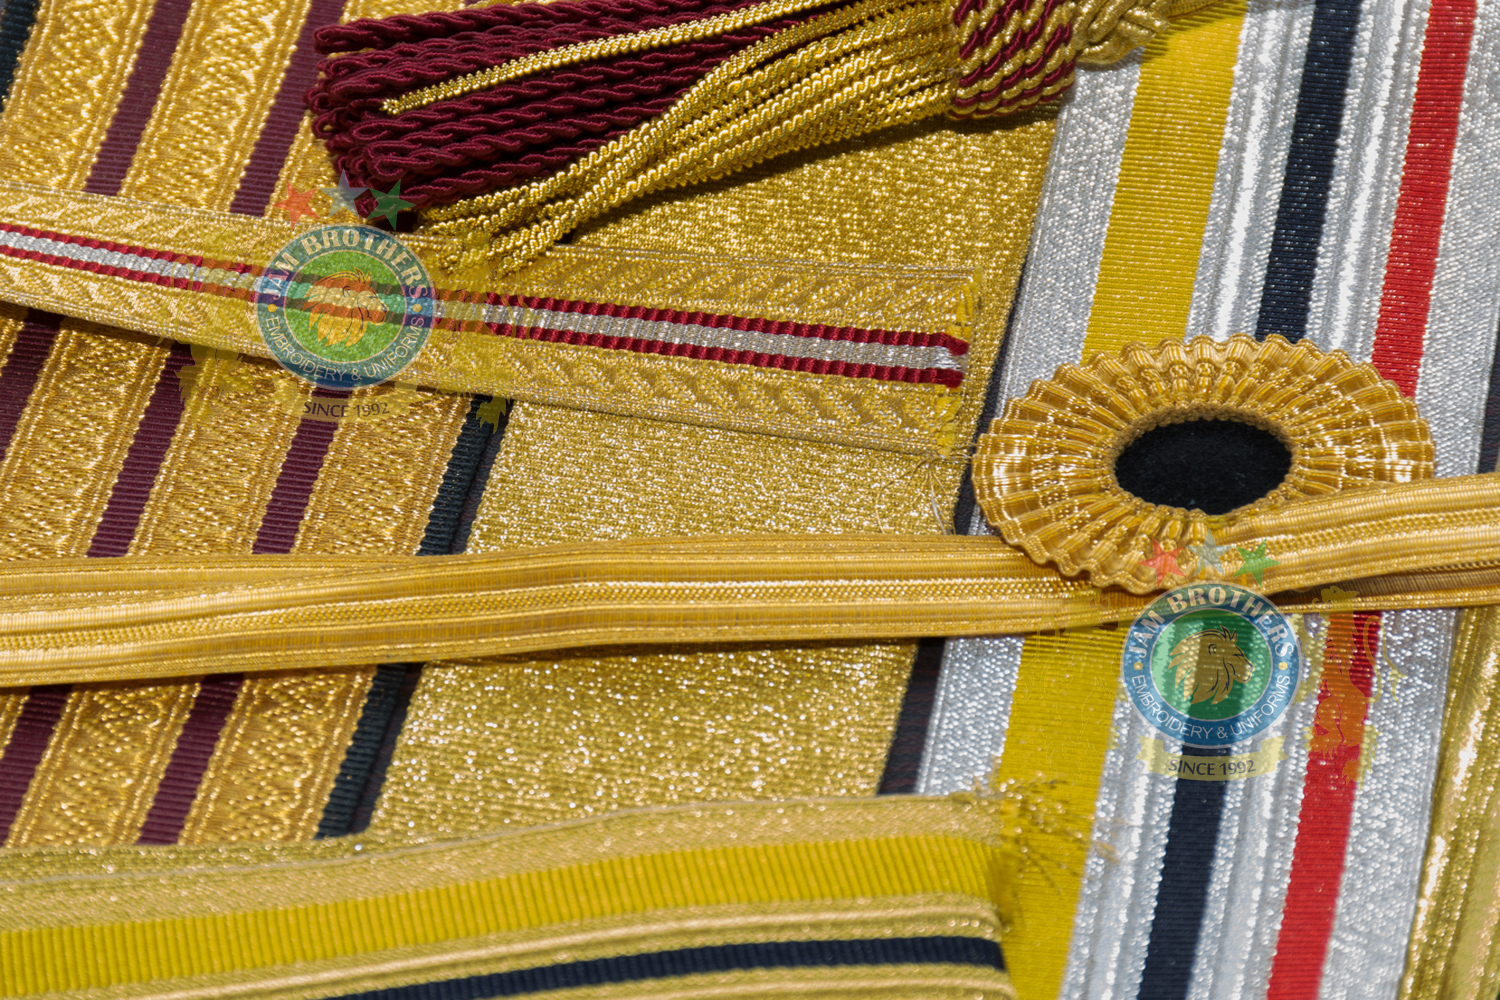 Lace Trimming Braid Gold White Silver Blue Weave Weaving Uniforms Accouterments Tailor Belts Leather Ceremonial Combat Cadet Parade Belts #Hand Embroidery #BullionEmbroidery #TradeBadges #MessDress #Badges #Ranks #Regiment #Parade #Ceremonial #Cord #Textile #ArmedForces #BritishArmy #Army #Aiguillette #Military #MilitaryUniforms #Militaria #Insignia #Headwear #Caps #OfficerCaps #UniformCaps #PeakCaps #DressCaps #MilitaryCaps #RailCap #Berets #Glengarry #RoyalNavy #RoyalMarine #RoyalAirForce #RAF #Infantry #Armor #EME #Battalion #Medals #Ribbons #Braid #Lace #Uniforms #UniformSupplie #Police #Security #Buckles #Guards #Accoutrement #Badge #Patch #Machine #MachineEmbroidery #HandEmbroidery #Bullion #BullionBadges #BullionEmbroidery #WovenBadges #Woven # Emblems #Regiment #Regimental #OfficerCaps #PeakCaps #Soldier #Helmets #Covers #HelmetCovers #Armlets #Sliders #Epaulettes #Webbing #Chevron #Officer #ShoulderBoards #Gorgets #Tassel #Sash #Hand #HandSewn #Aviation #AviationClothing #Crest #FamilyCrest #CoatofArms #EmbroideredPillows #Cords #Aiguillettes #CapCords #ChinCord #DressCord #SwordKnot #Tassels #WhistleCord #Lanyard #Knots #Banners #ClanBadges #Peaks #Visor #Wings #CapBadges #Pennants #HonorCaps #OfficerCaps #SportsCap #Masonic #Aprons #MasonicAprons #Collars #MasonicCollars #Gloves #MasonicGloves #MasonicPatches #Patches #Regalia #MasonicRegalia #Freemason #Braid #Chevron #Cuffs #Fringes #Sashes #HeadGear #FieldGear #England #USA #Poland #ArmedForces #Schools #Colleges #University #Sialkot #Pakistan Sialkot Pakistan PeakCaps OfficerCaps ShoulderRanks BullionBadges UniformAccessories MilitaryUniforms DressCap TradeBadge RankMarking WireBadges Army Airforce Navy Police